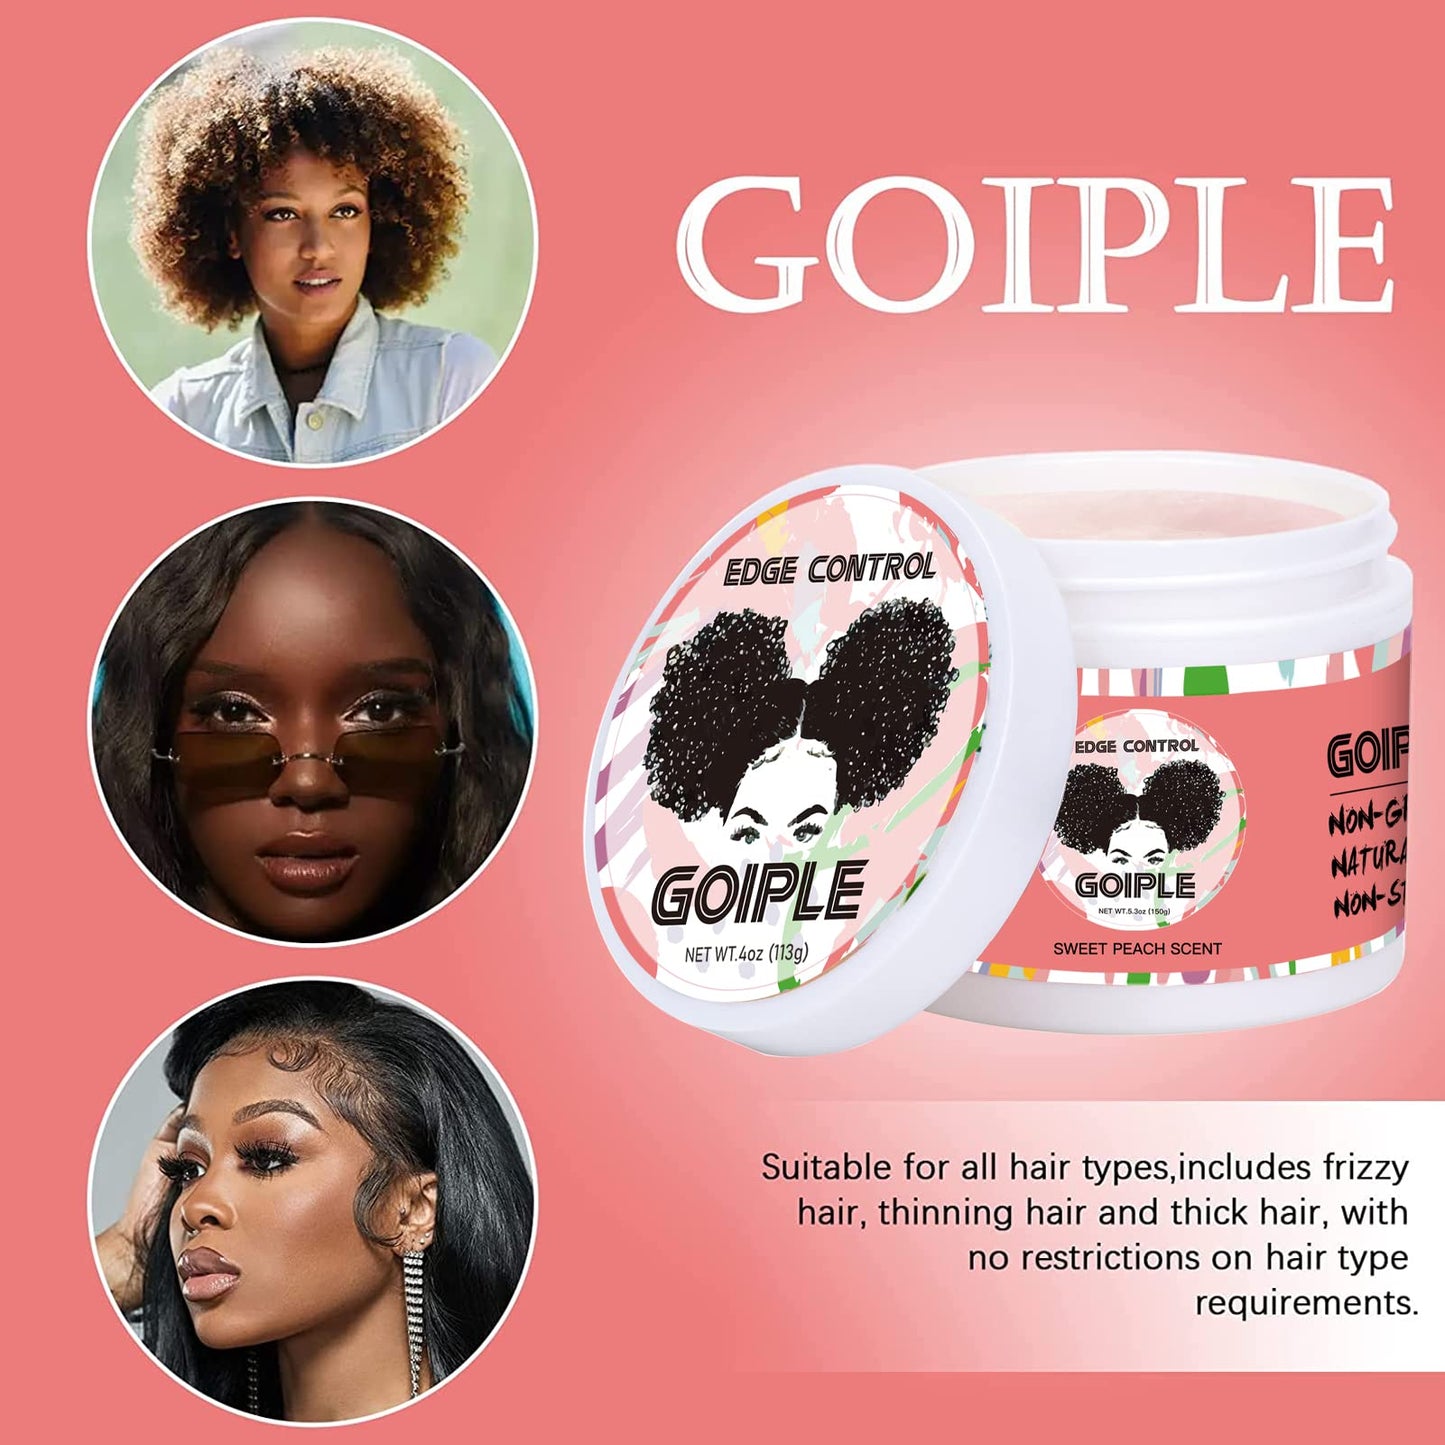 Goiple Edge Control Wax for Women Strong Hold Non-greasy Smoother Edge Wax Styling Tamer Edge Control for Black Hair No Flaking, White Residue, Edge Control Set (Sweet Peach)